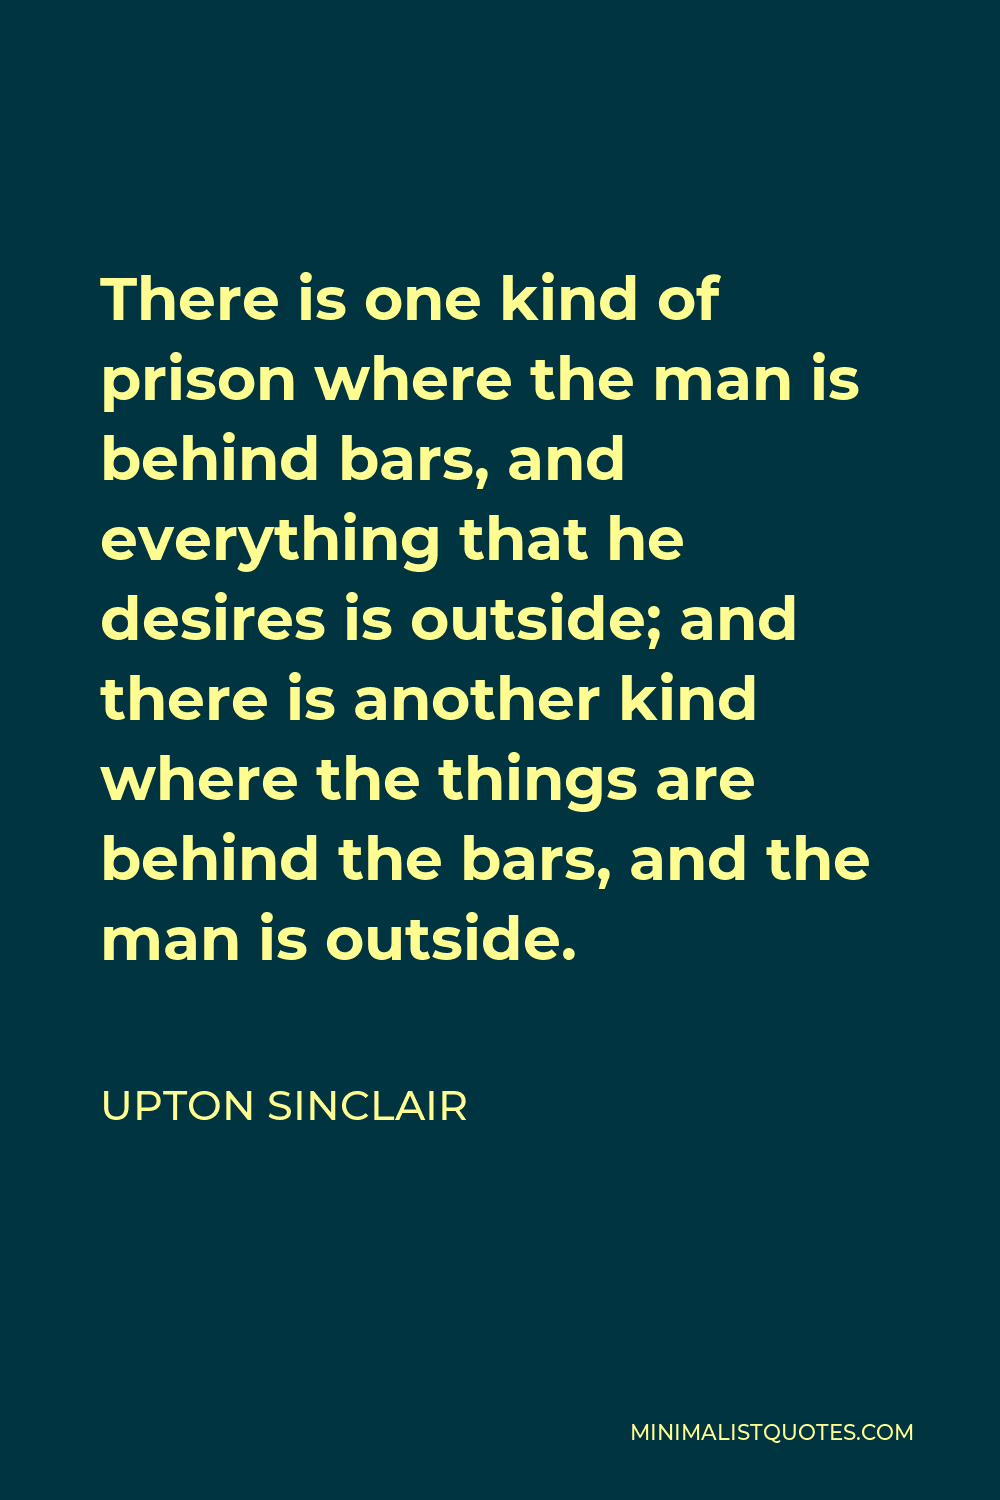 Upton Sinclair Quote - There is one kind of prison where the man is behind bars, and everything that he desires is outside; and there is another kind where the things are behind the bars, and the man is outside.